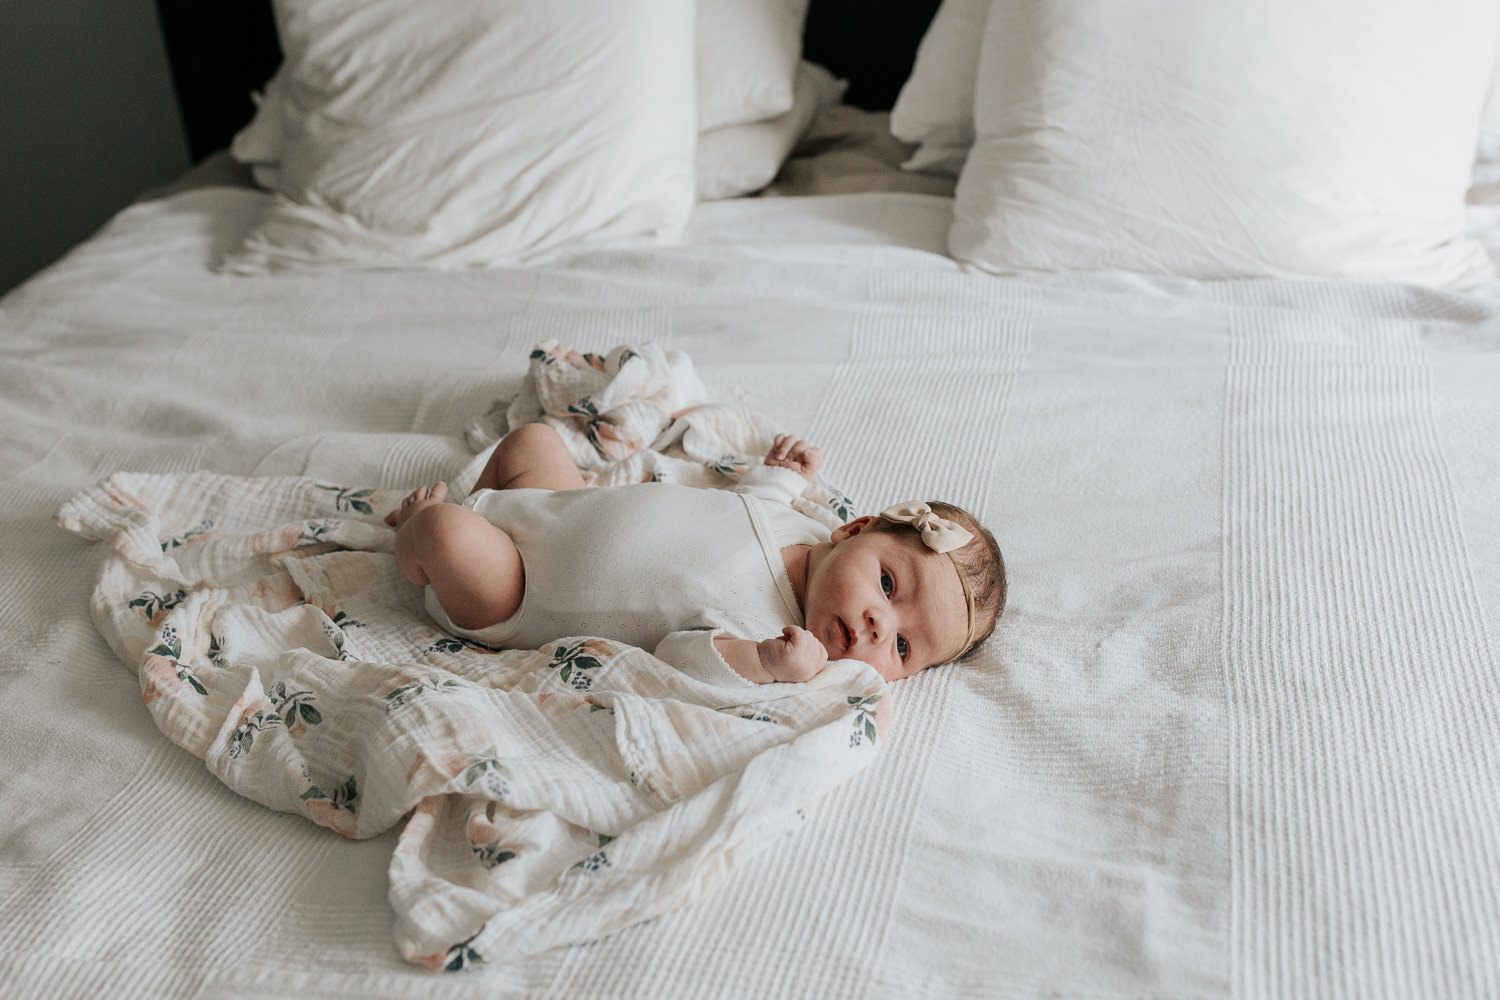 2 week old baby girl with dark hair in white onesie lying on swaddle with soft pink flowers, wearing bow headband awake on bed, looking at camera -​​​​​​​ GTA In-Home Photography